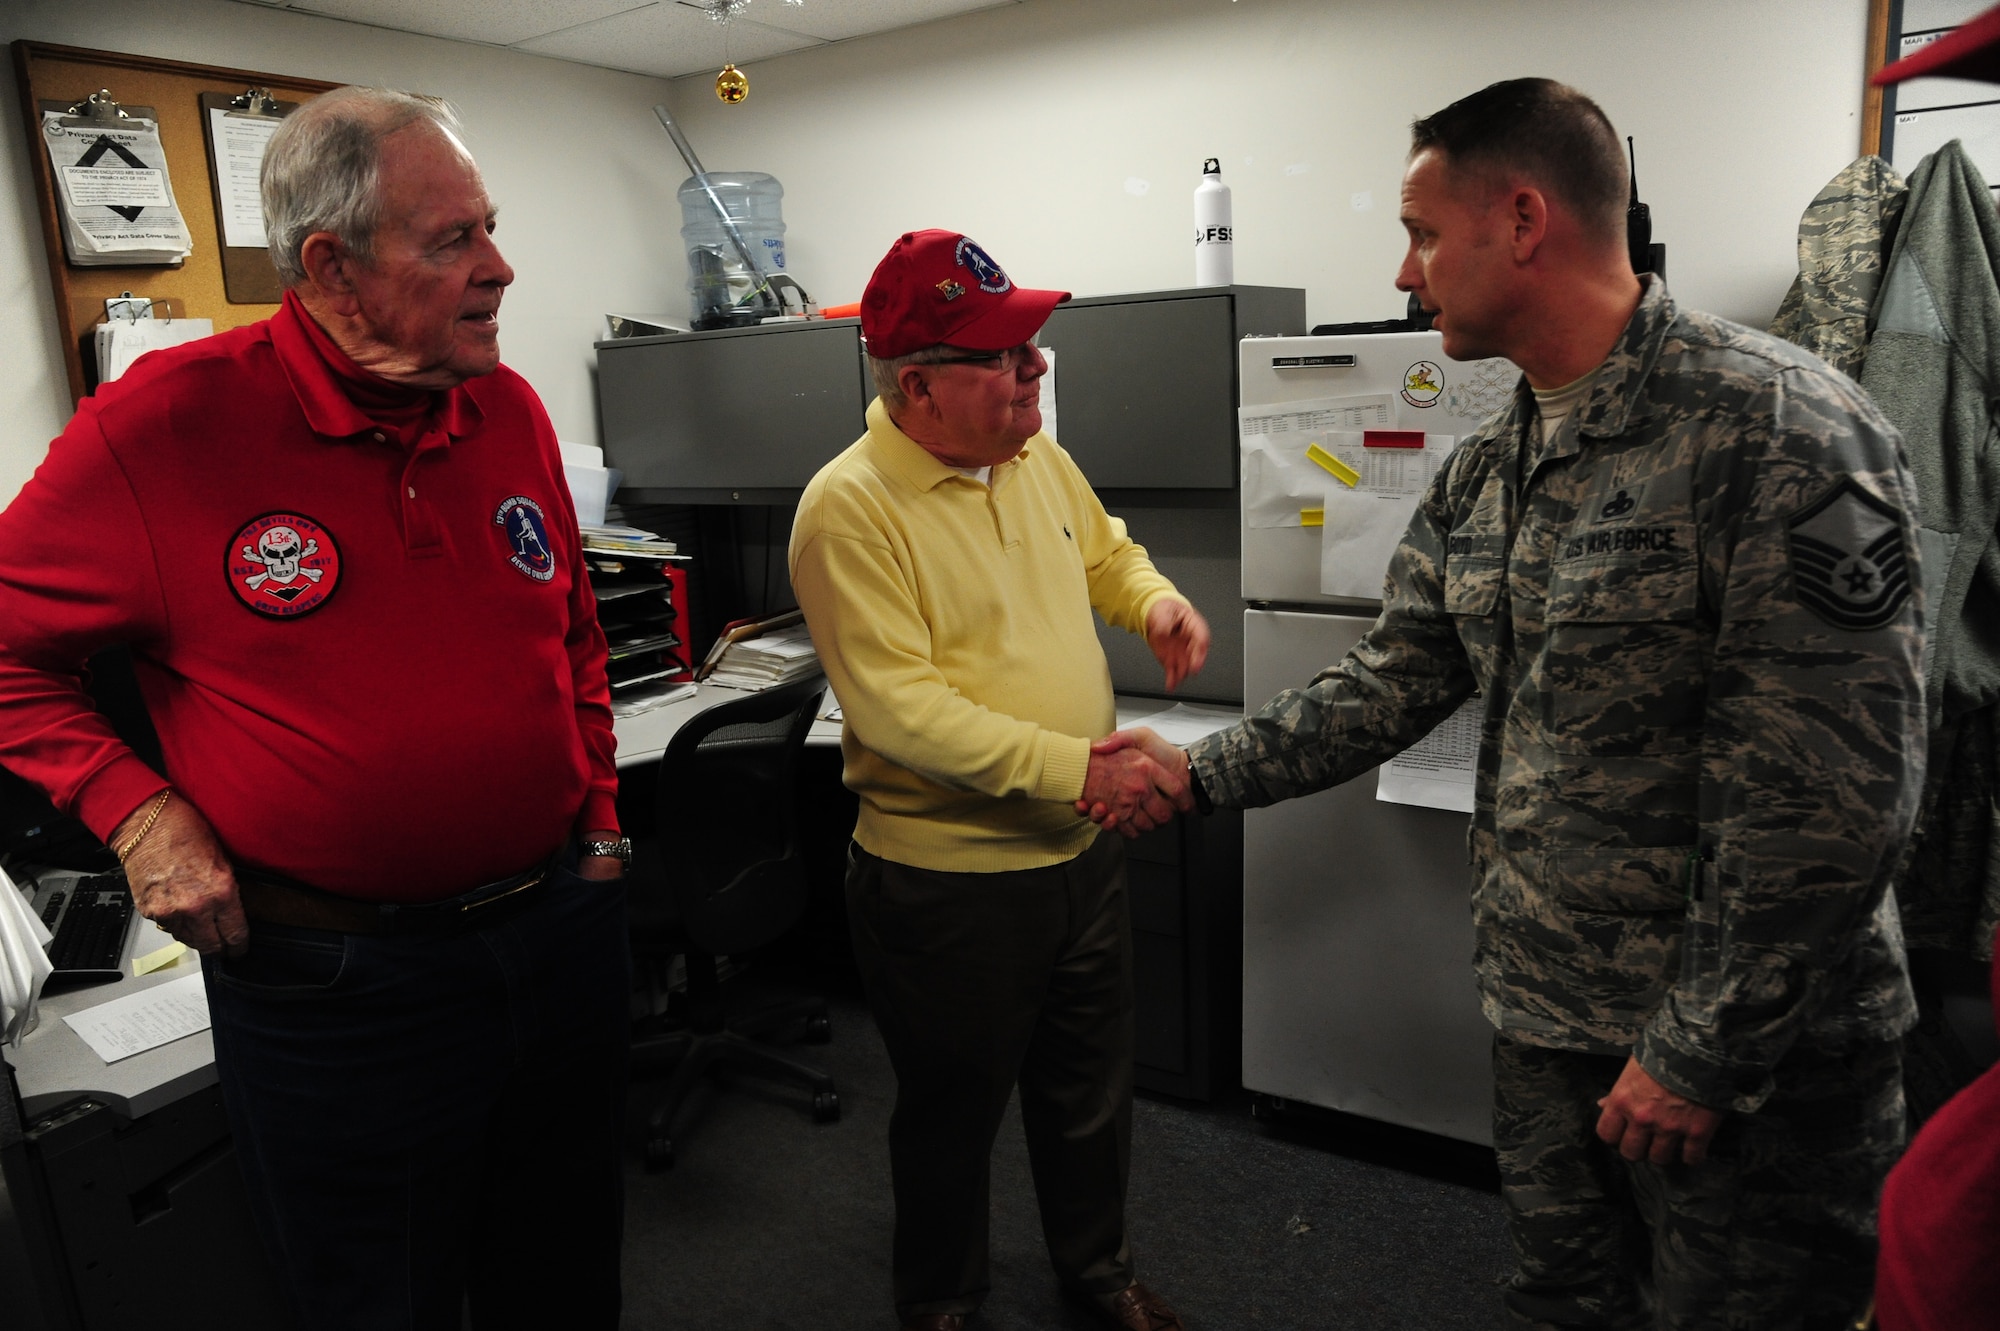 Bob Parks, the 13th Bomb Squadron Association (BS) vice president, middle, and Charlie Brown, the 13th BS Association president, left, shake hands with U.S. Air Force Master Sgt. Marty Boyd, the 13th Aircraft Maintenance Unit lead production superintendent, at Whiteman Air Force Base, Mo., Dec. 17, 2015. The veterans met with Airmen from different units, traded stories and educated Airmen from today’s 13th BS about the association. (U.S. Air Force photo by Senior Airman Keenan Berry)